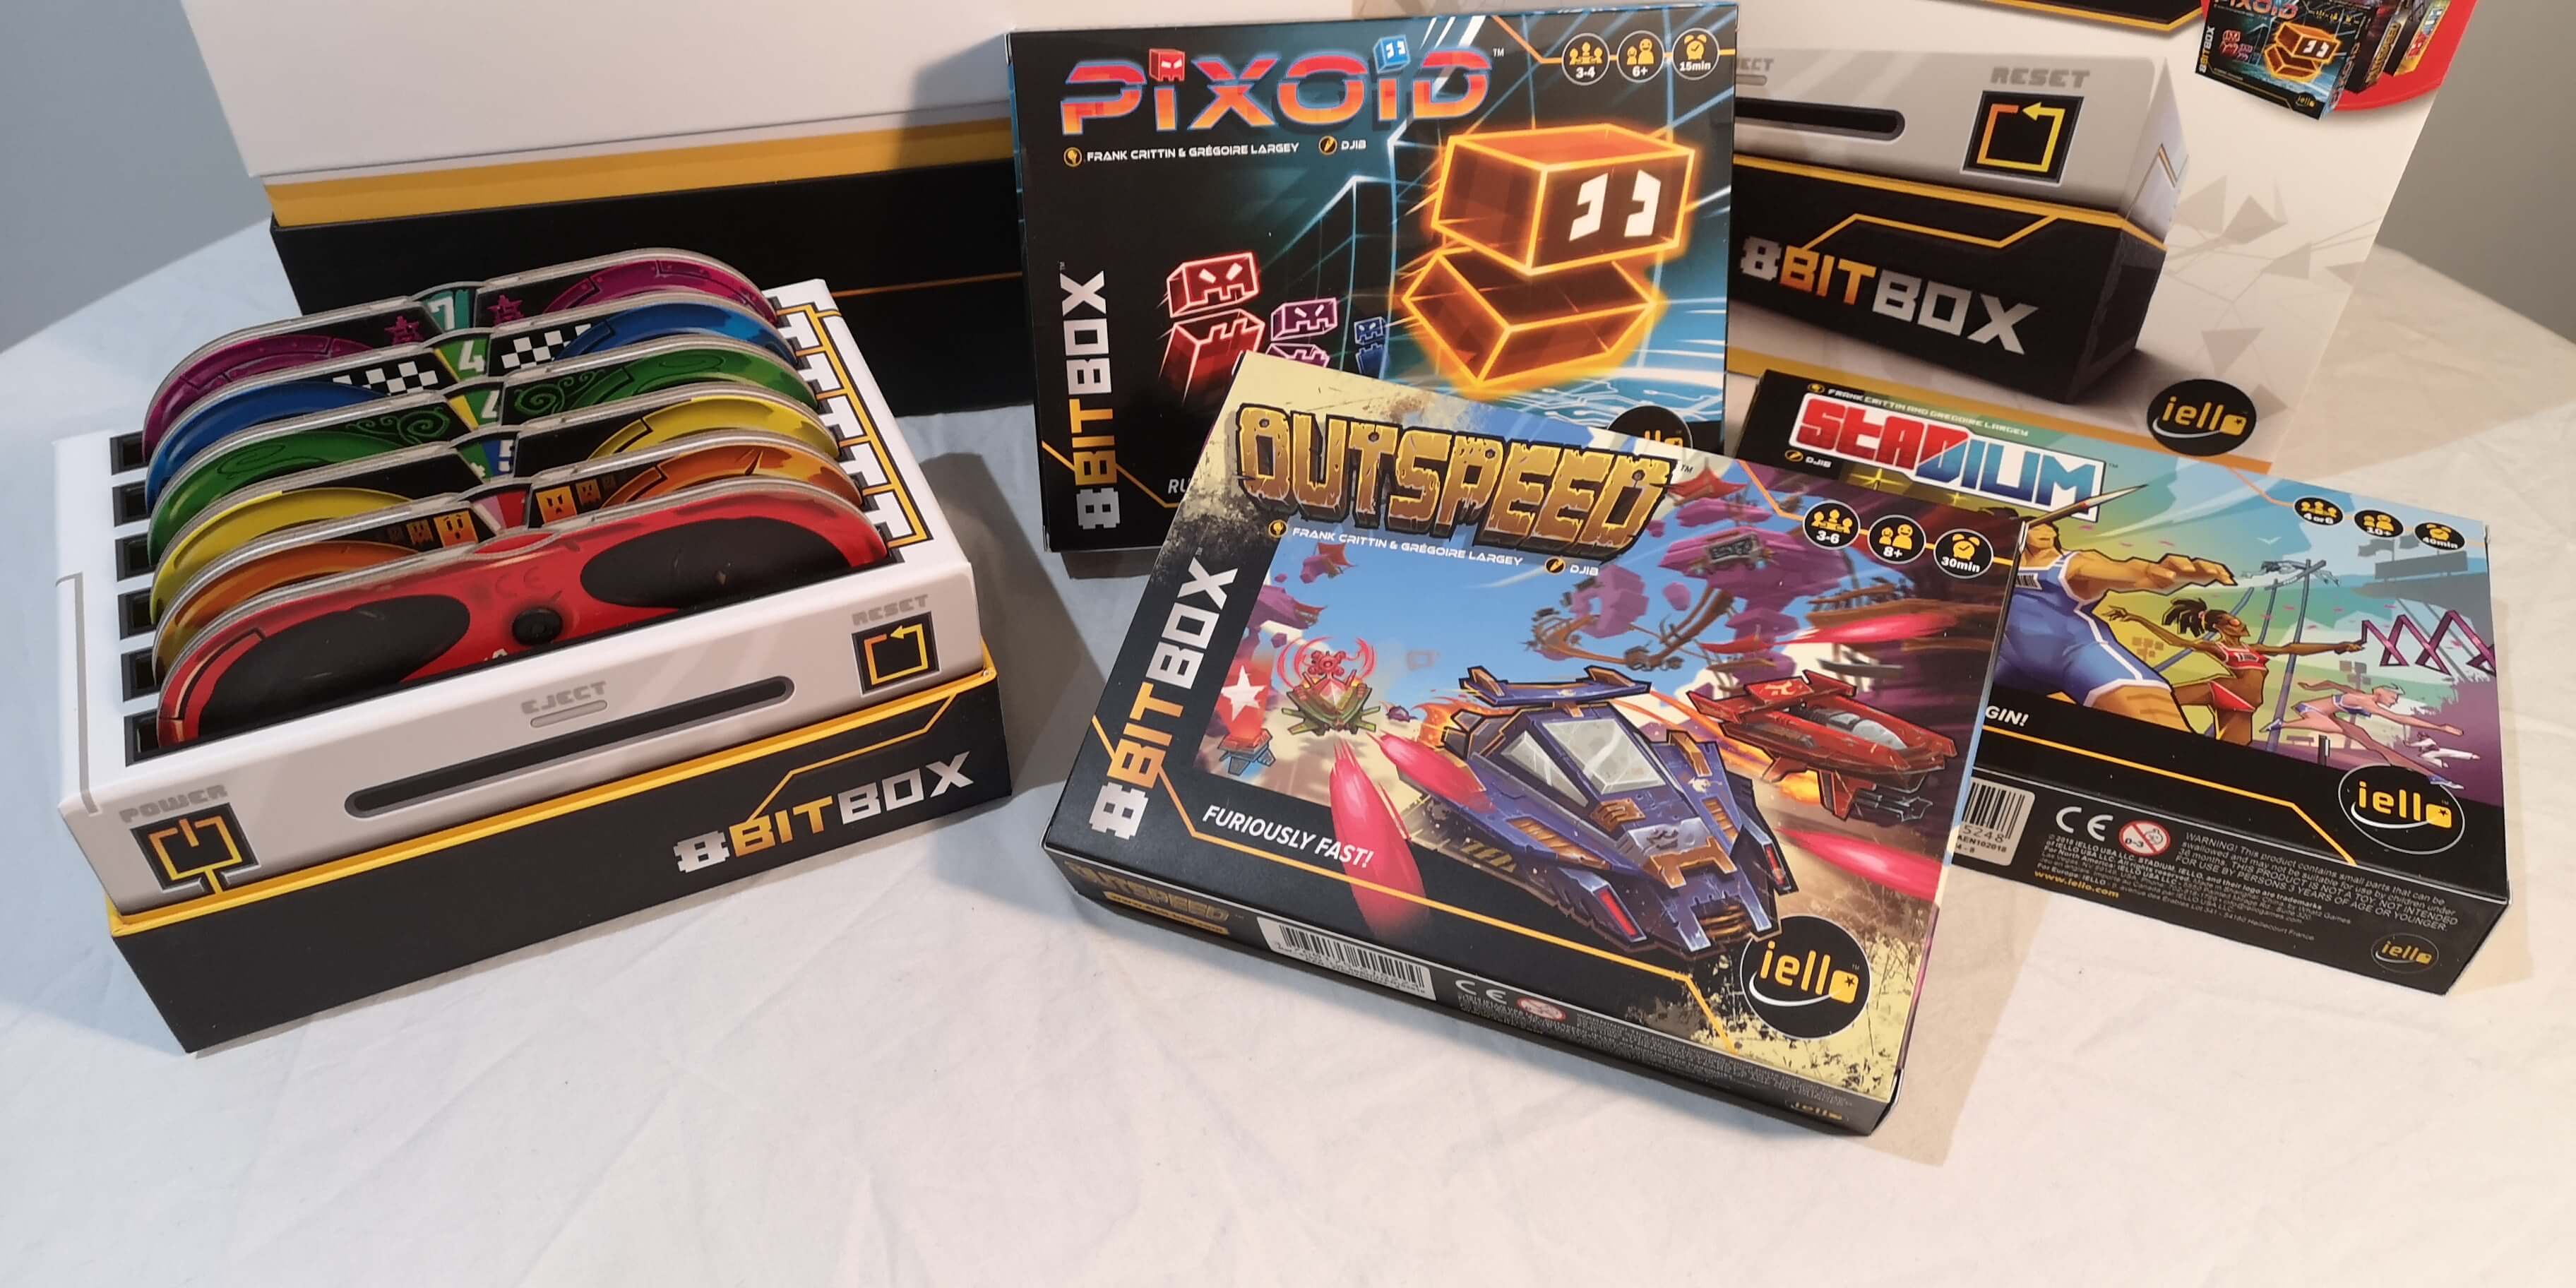 8Bit Box core games and components.